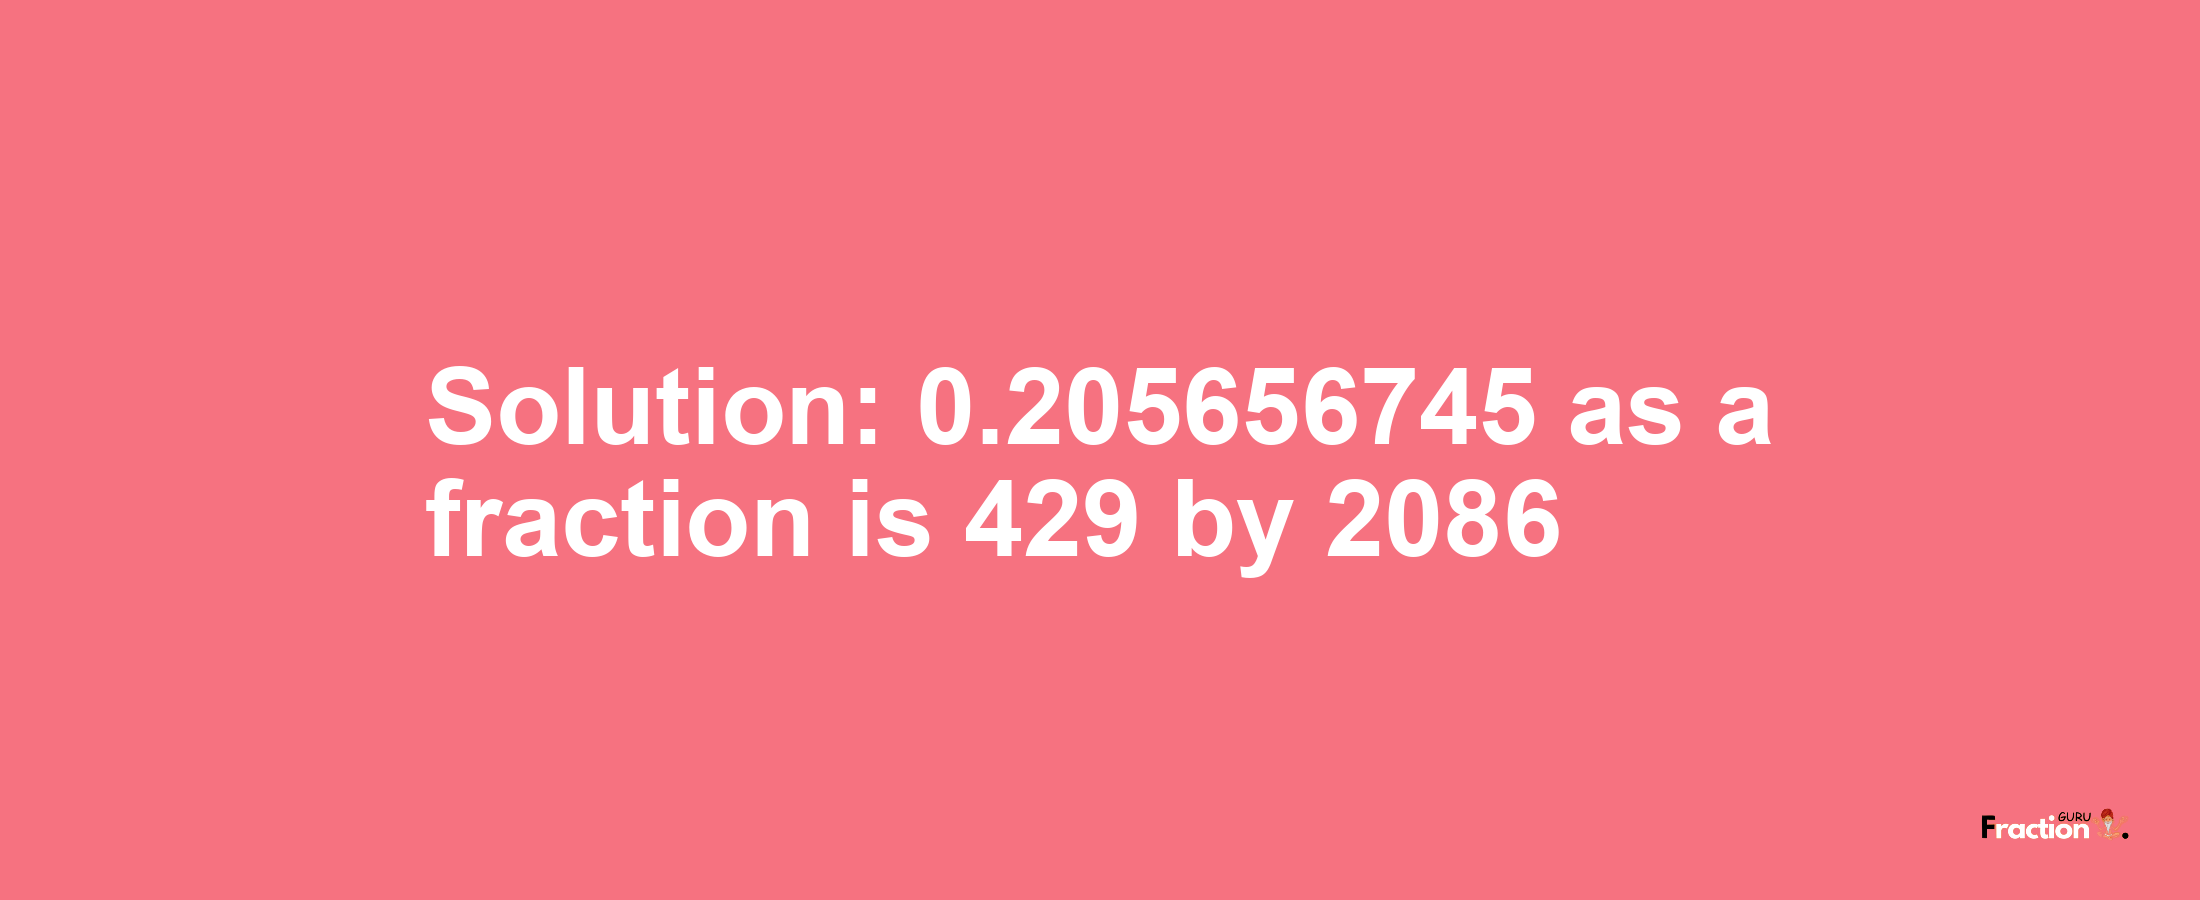 Solution:0.205656745 as a fraction is 429/2086